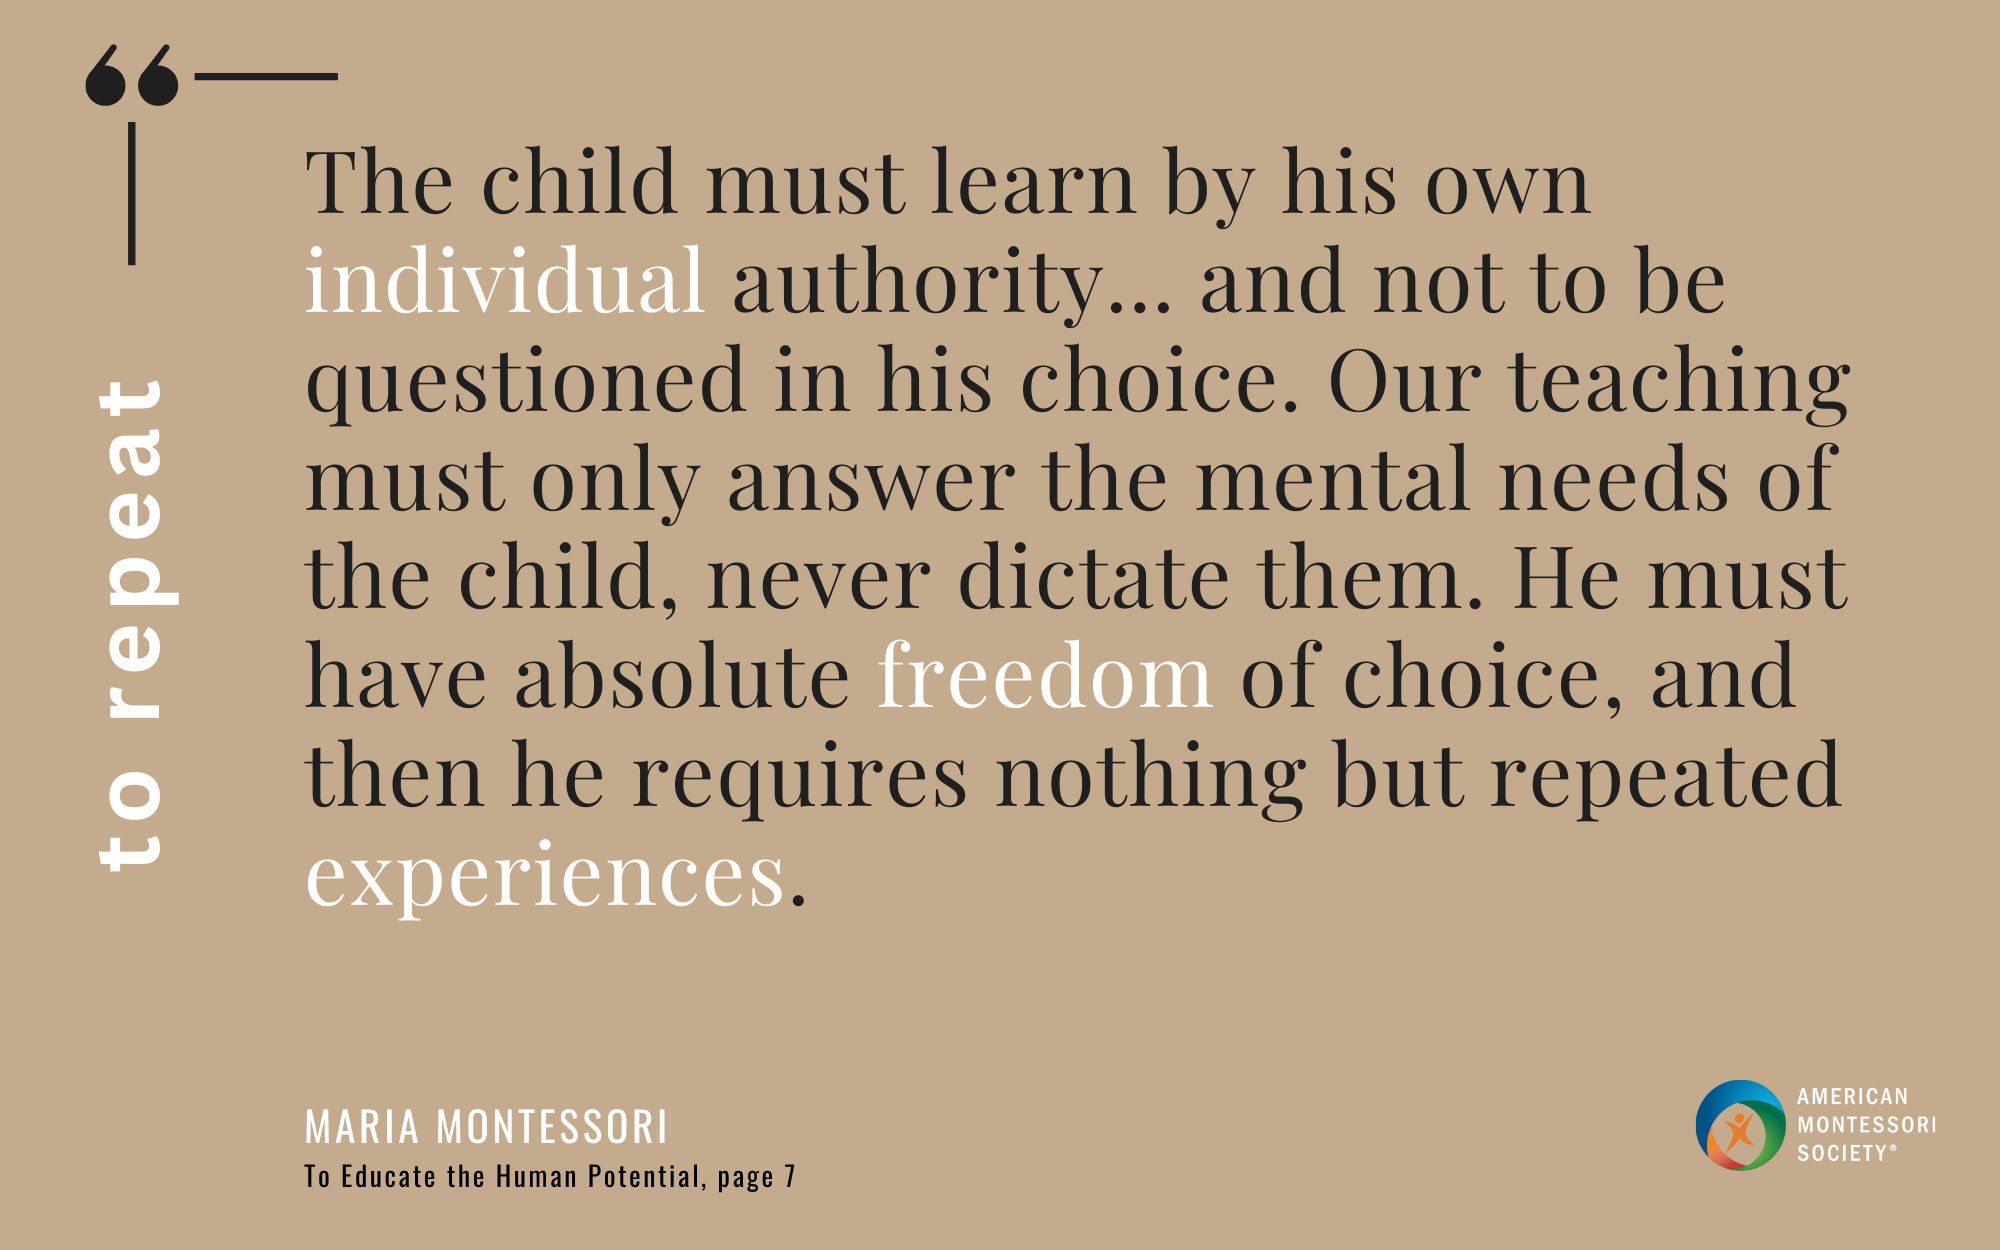 The child must learn by his own individual authority... and not to be questioned in his choice. Our teaching must only answer the mental needs of the child, never dictate them. He must have absolute freedom of choice, and then he requires nothing but repeated experiences.